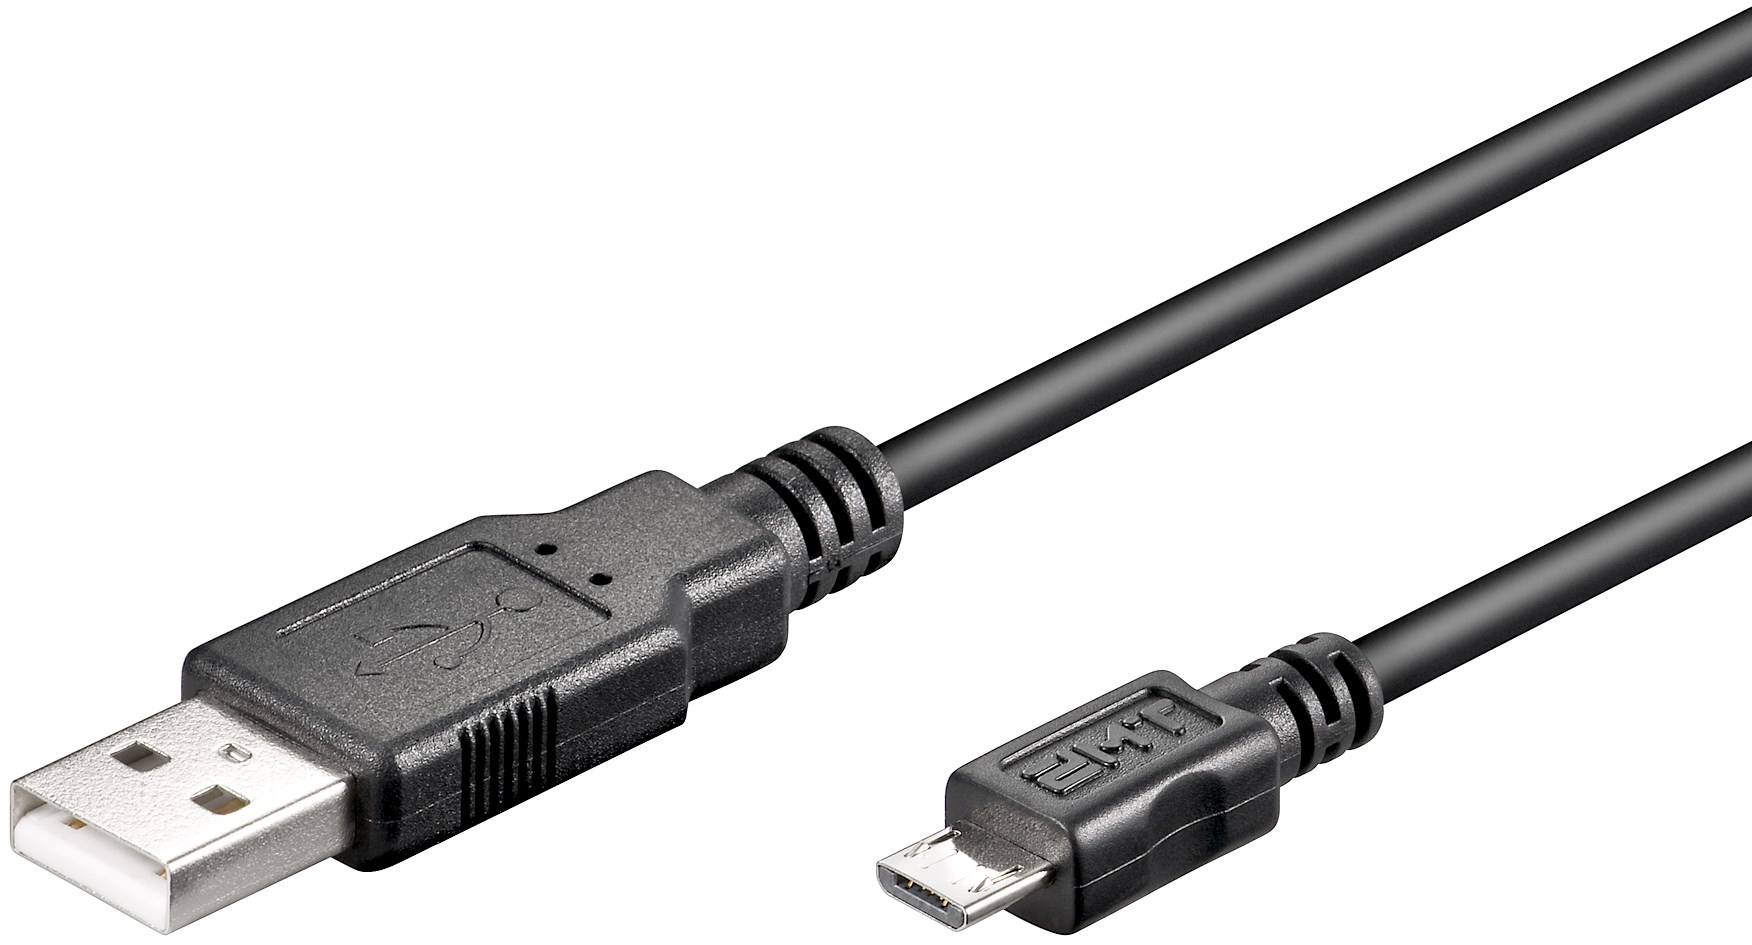 USB-cable A-male - micro B male 3m @ electrokit